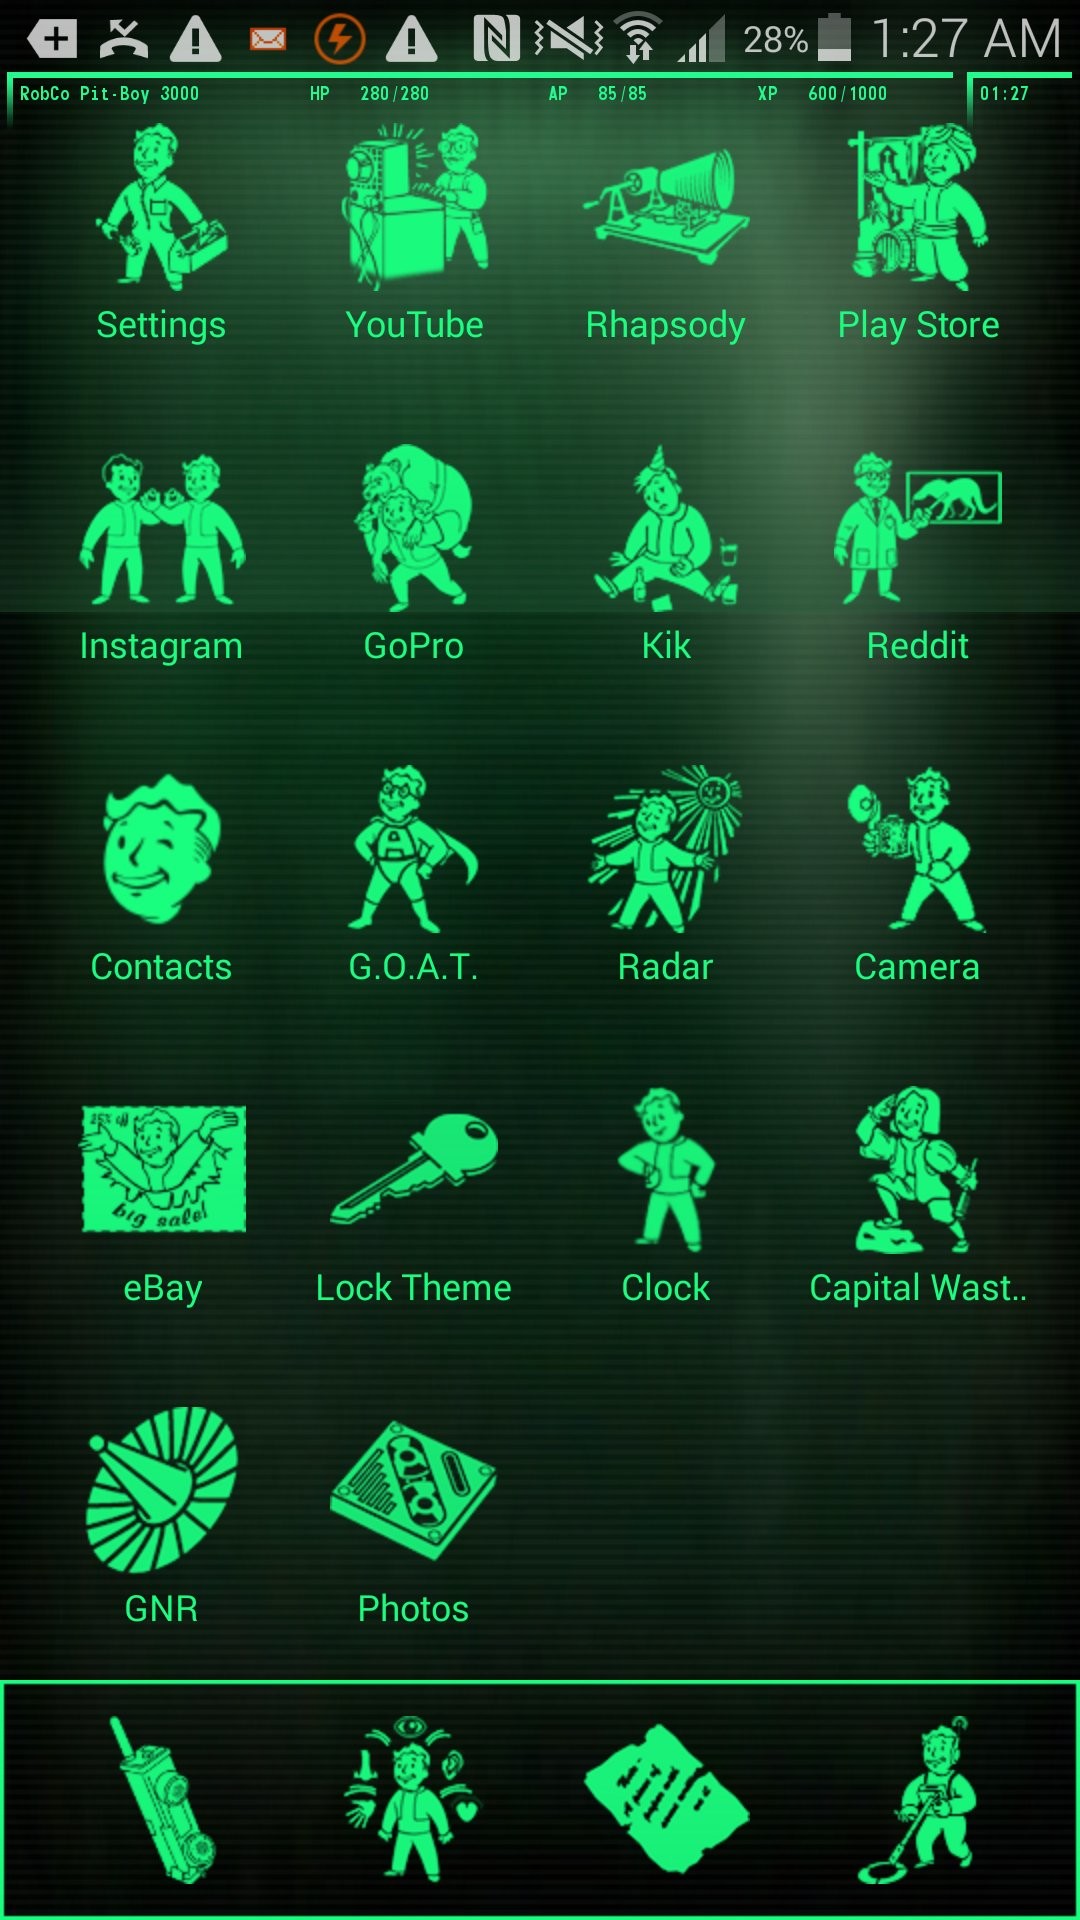 1080x1920 Pip-Boy 3000 Live Wallpaper - Android Apps on Google Play